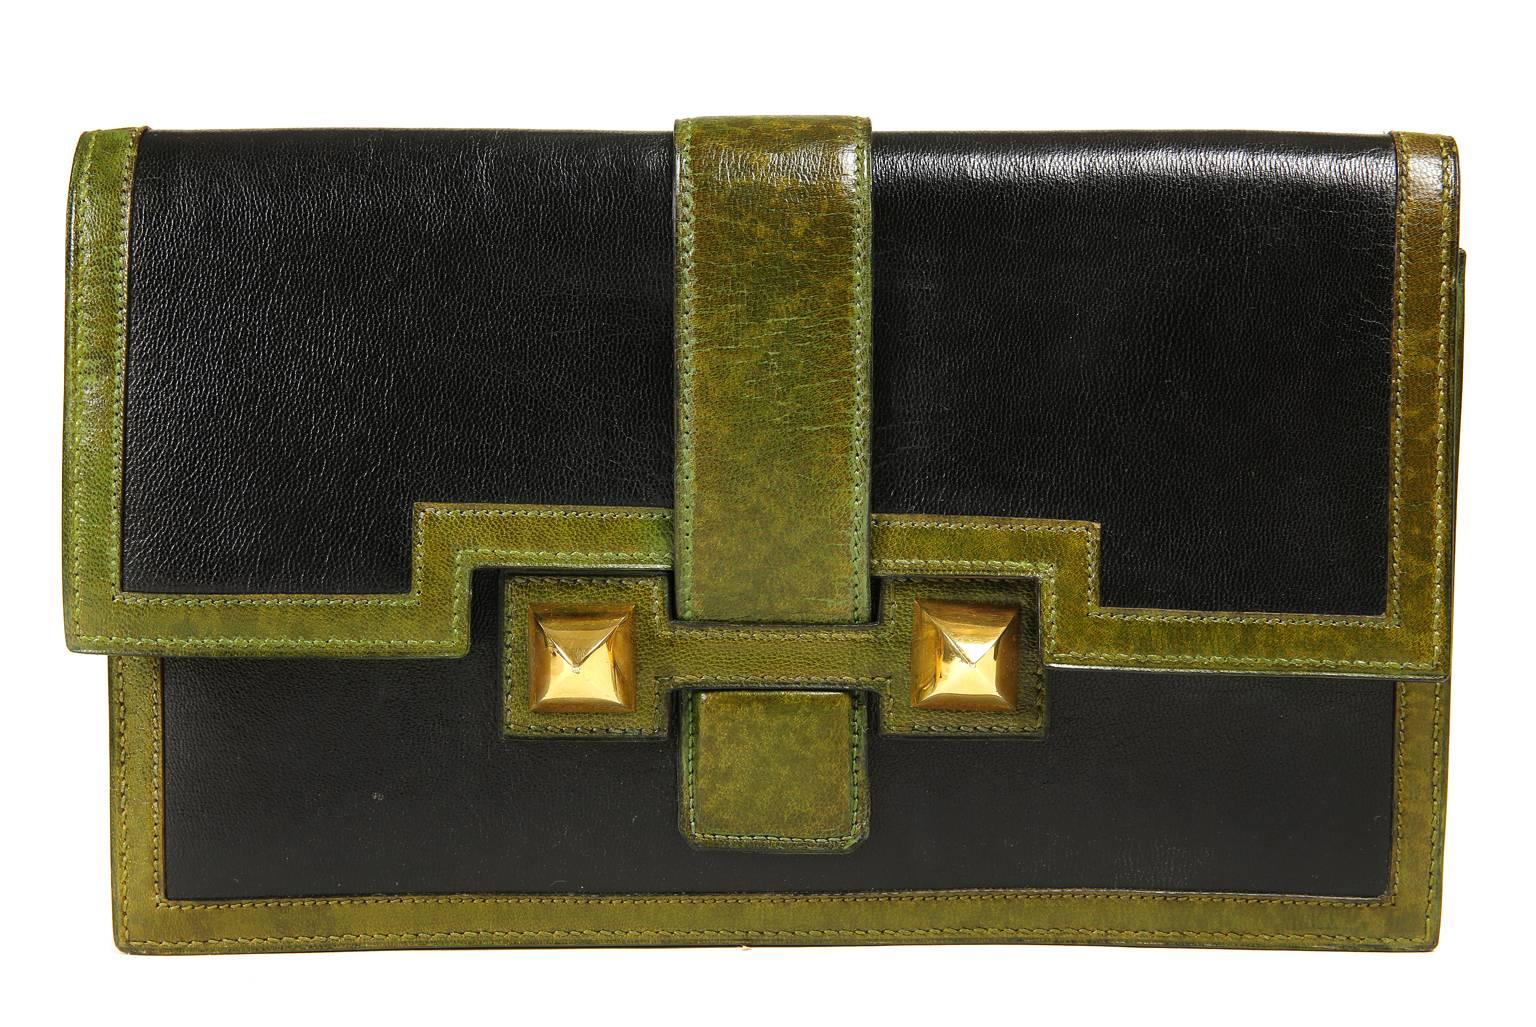 Hermès Black and Green Leather Clutch with chain strap For Sale 6